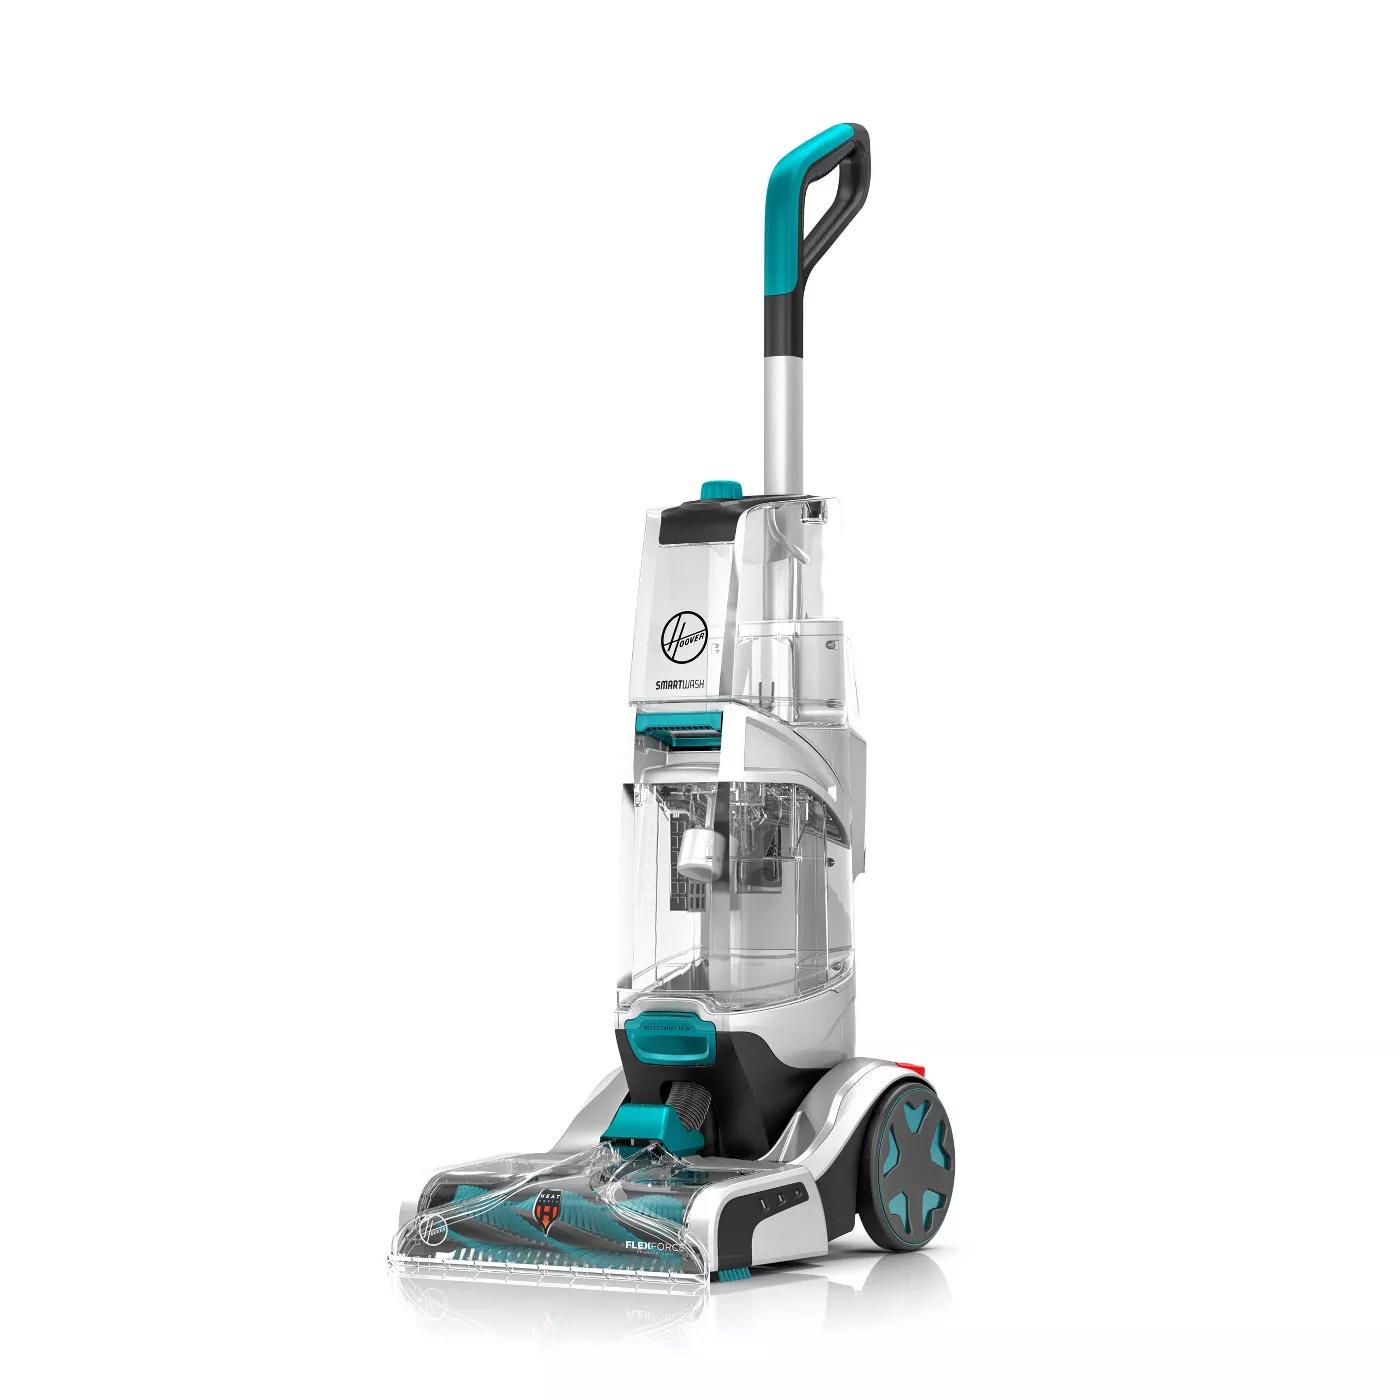 Hoover SmartWash Automatic Carpet Cleaner for $119.99 Shipped